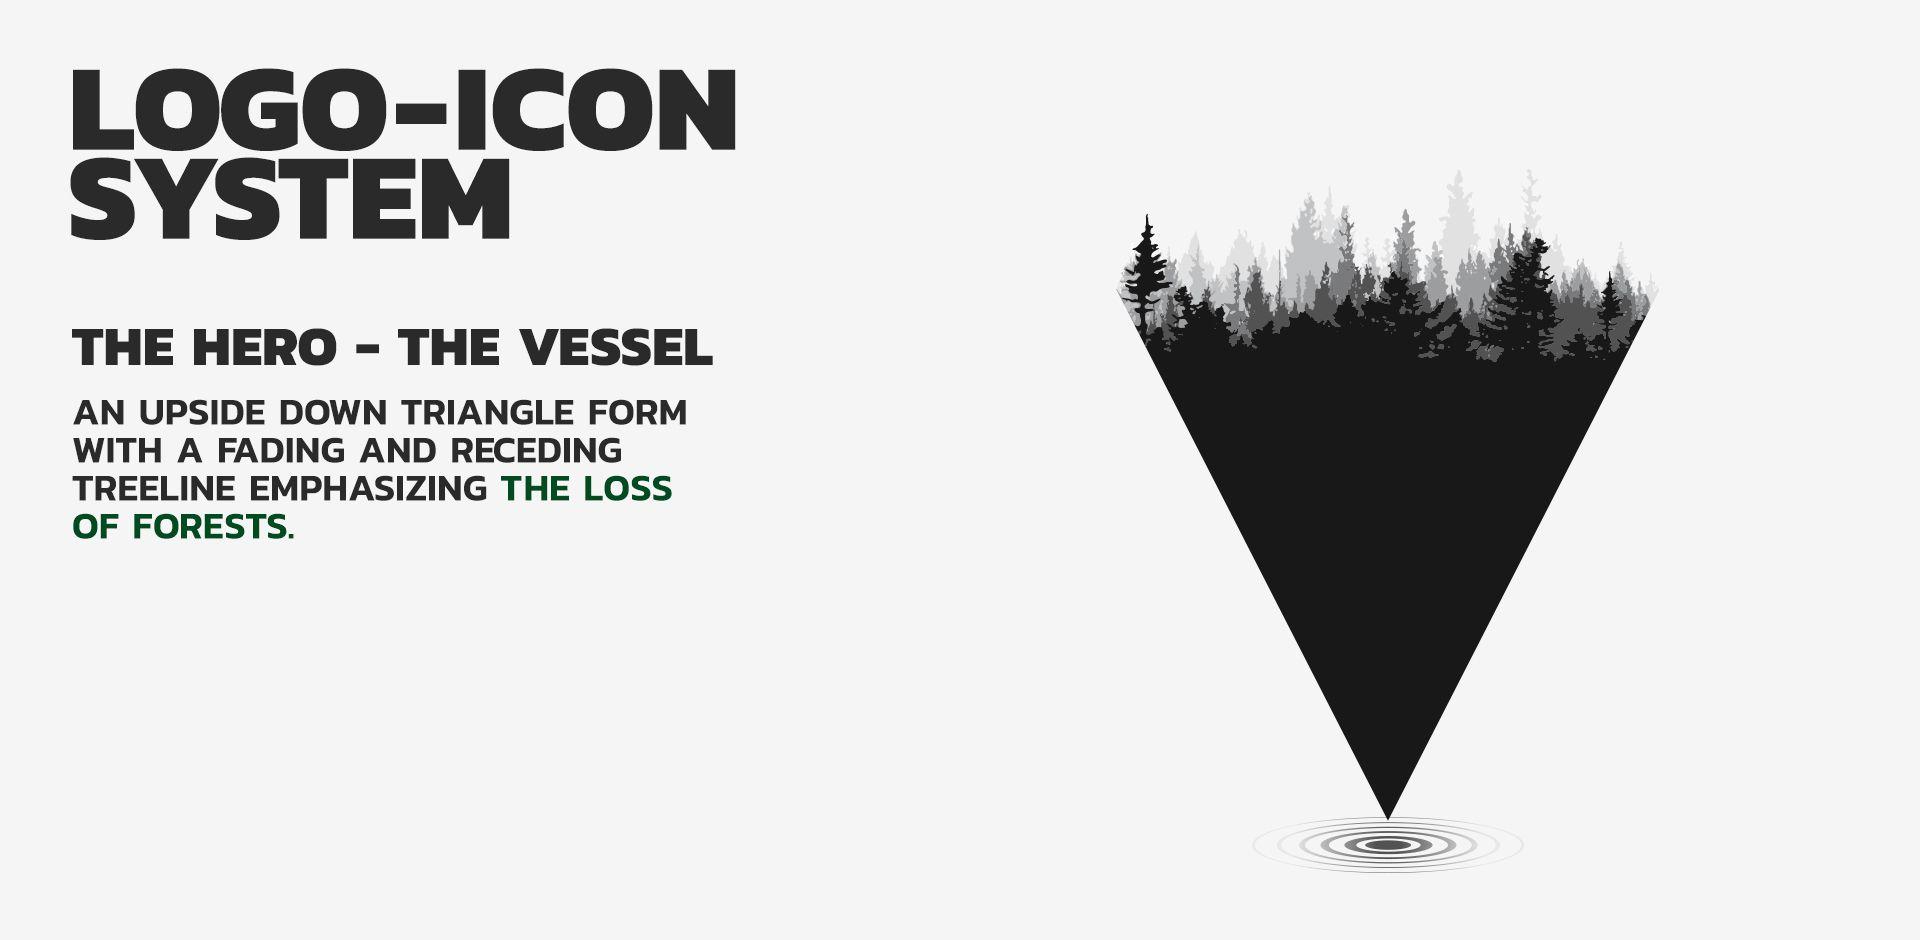 Upside Down Triangle Logo - Stand For Forests | Greenpeace on Behance